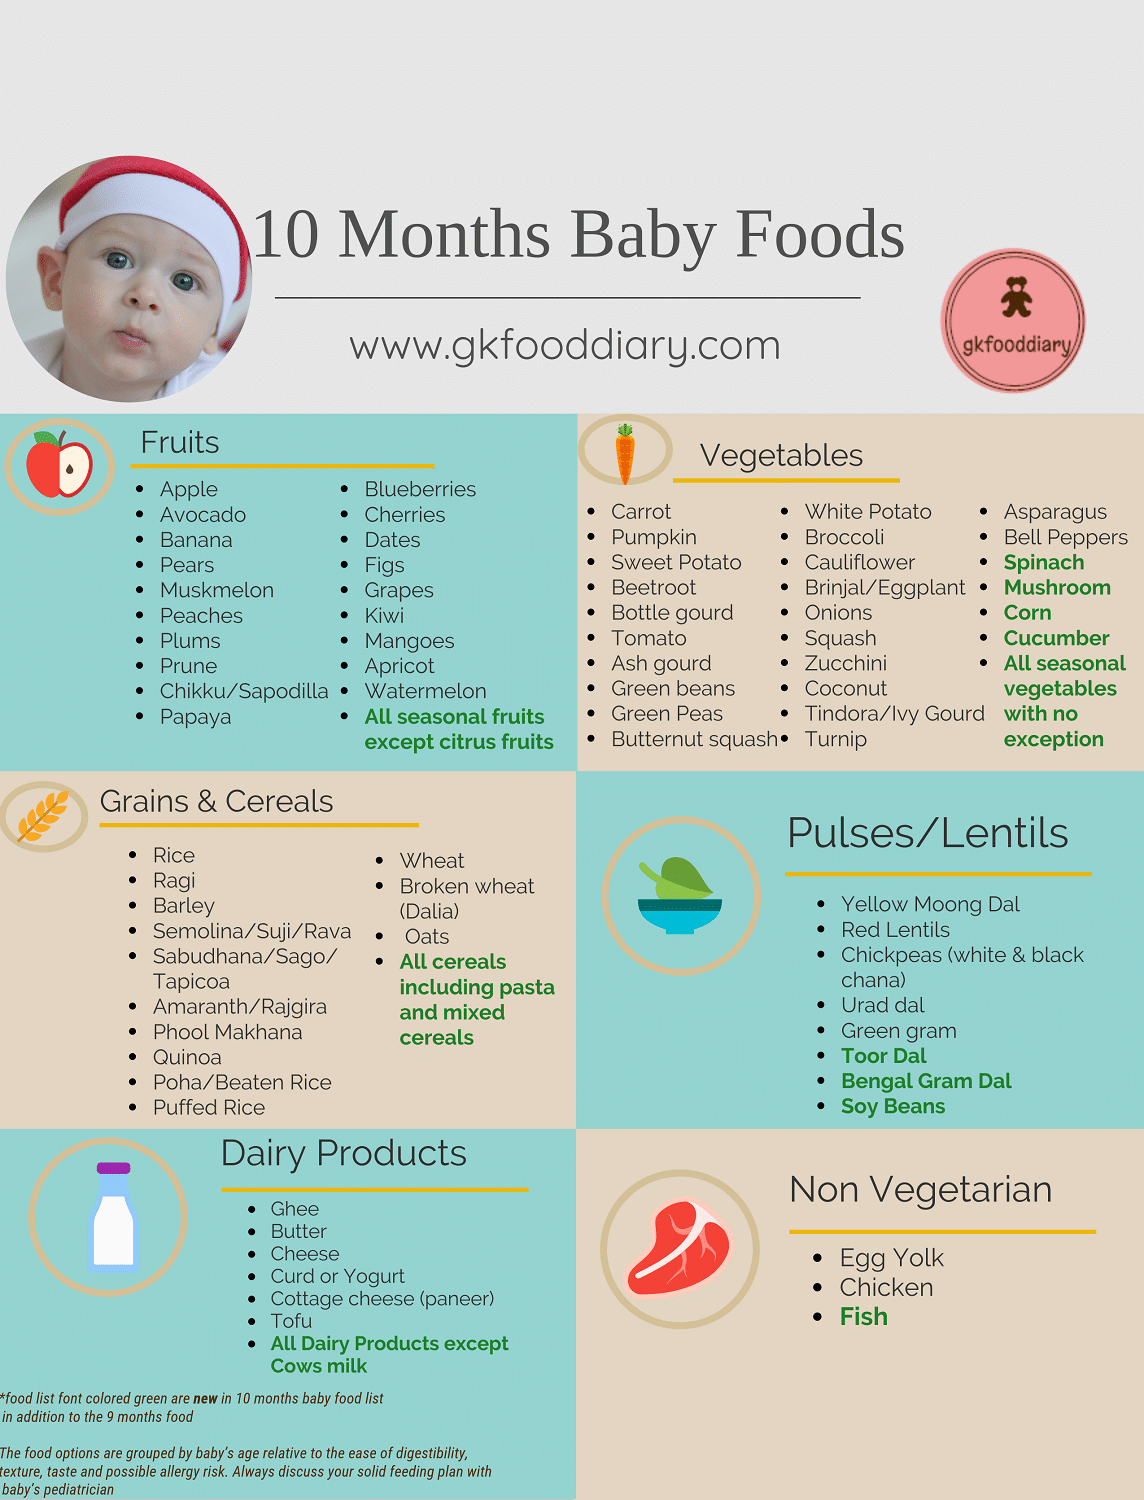 10 Months Indian Baby Food Chart | Meal Plan or Diet Chart ...